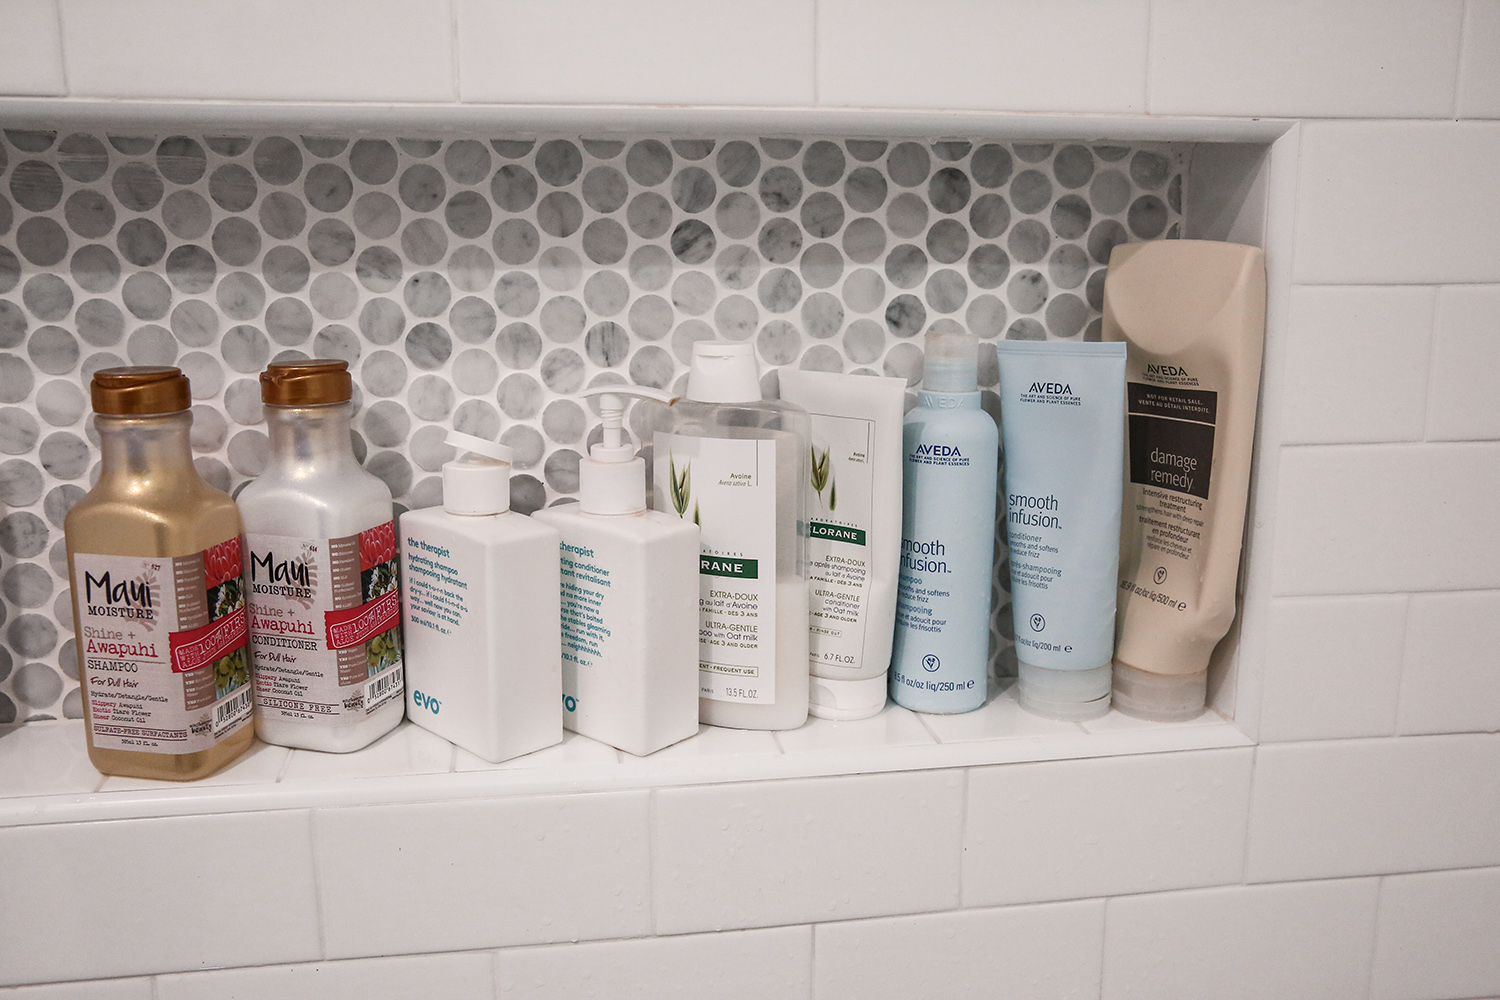 My Haircare routine